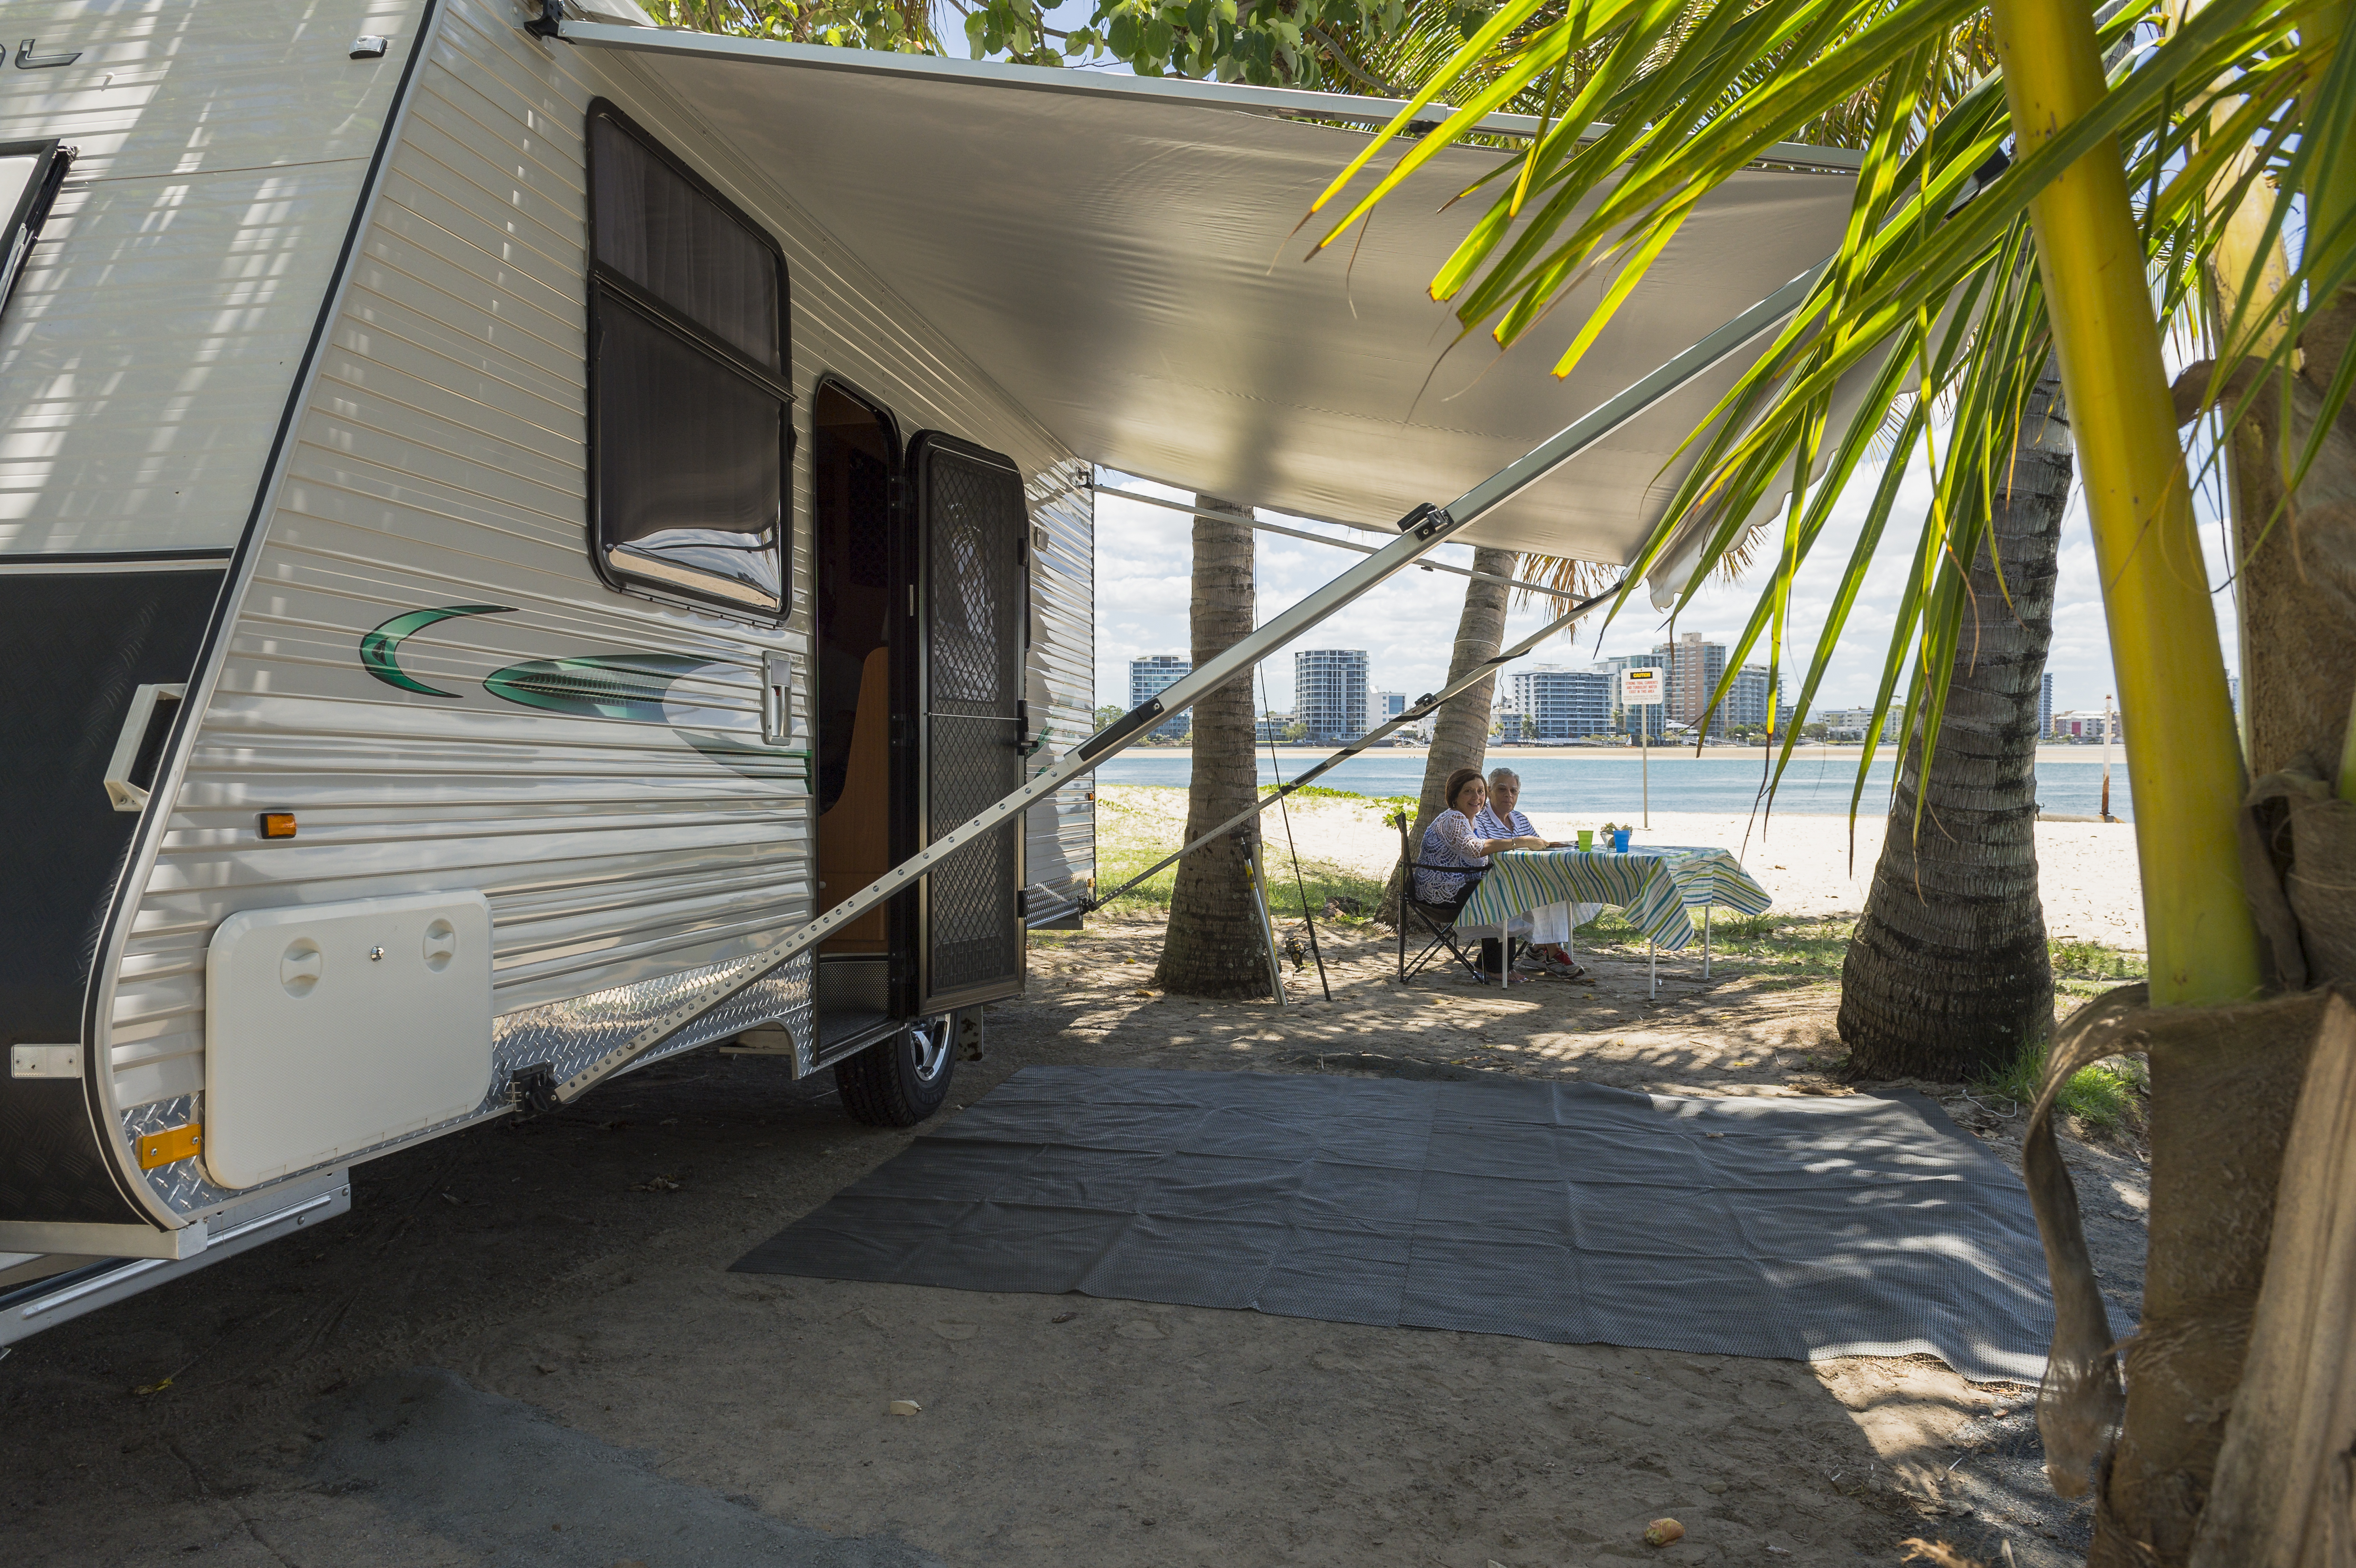 Our Guide To Electric Caravan Steps